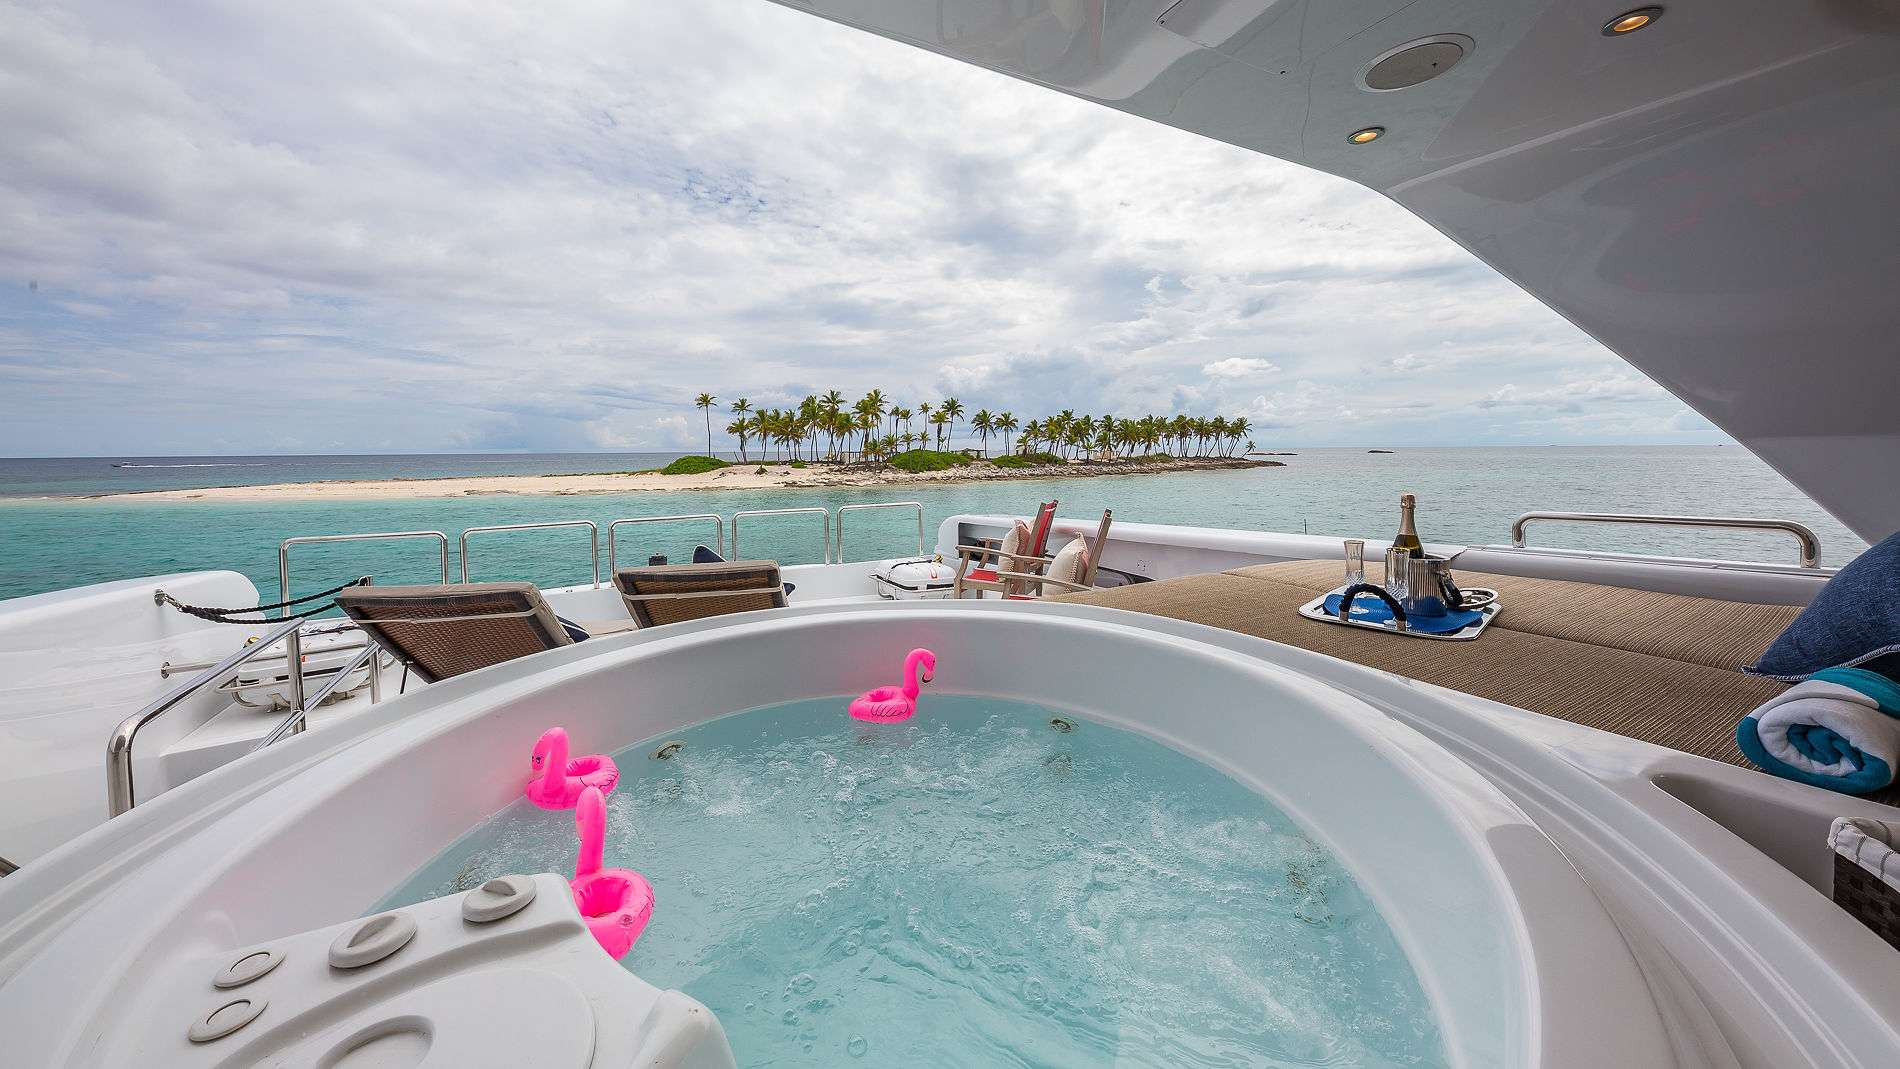 Jacuzzi On Yacht In The Bahamas